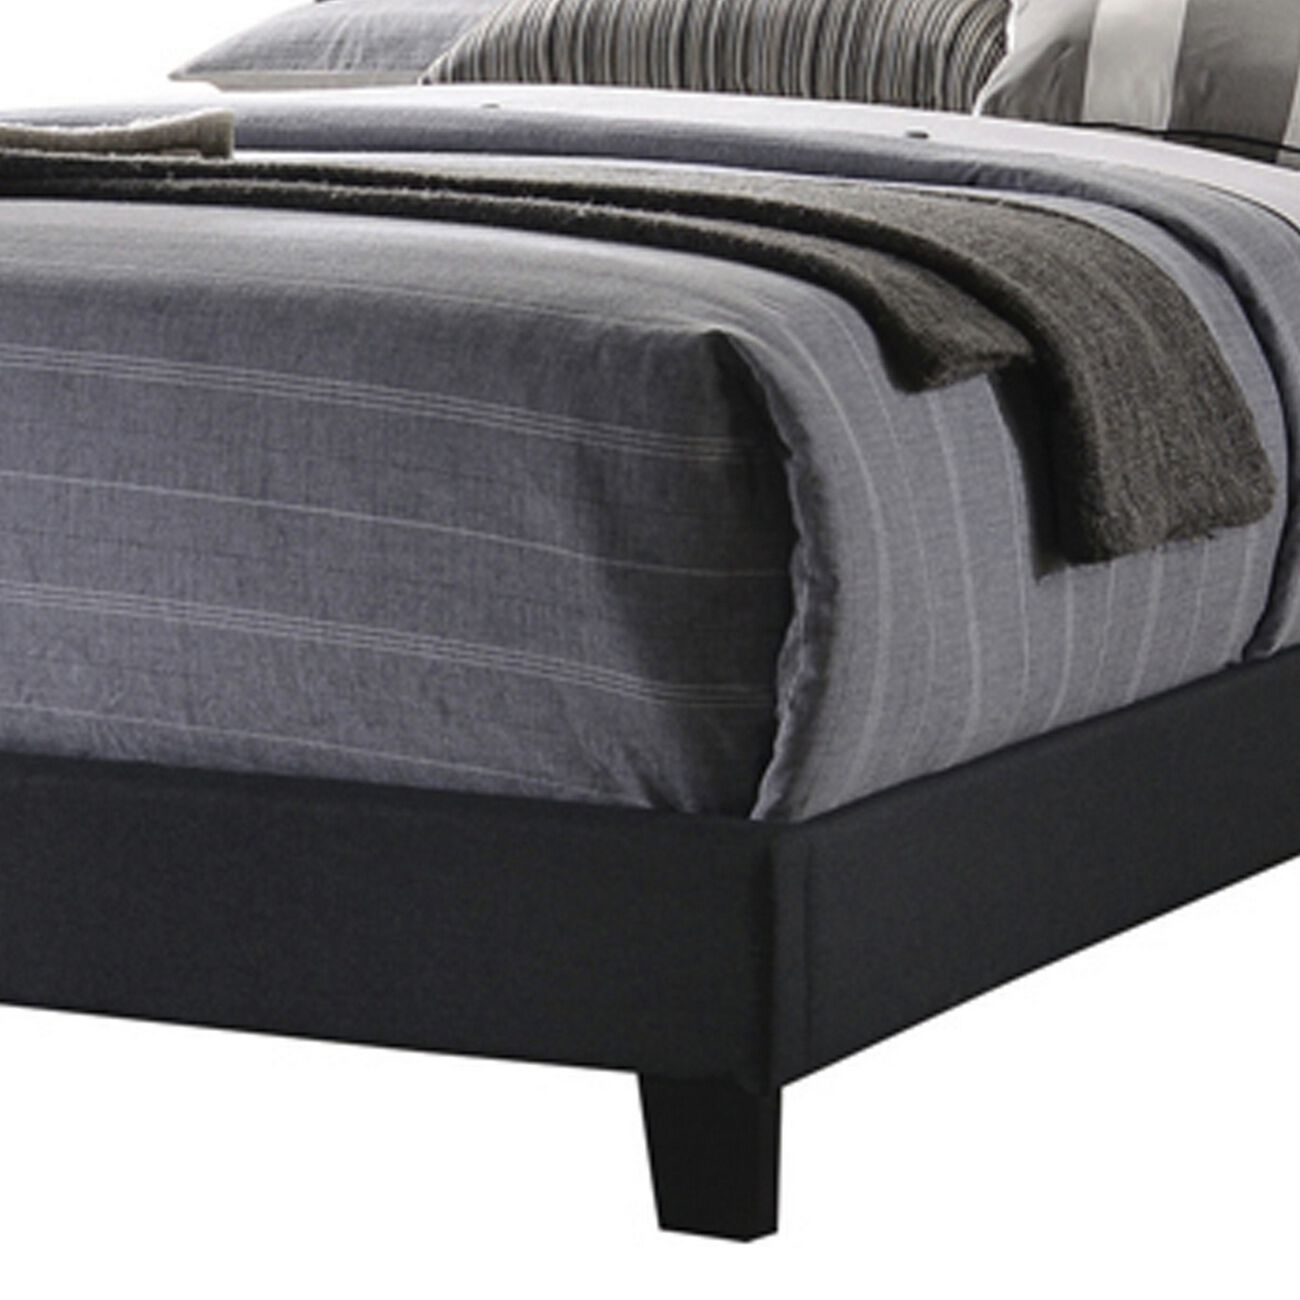 Eastern King Bed with Square Button Tufted Headboard, Dark Gray